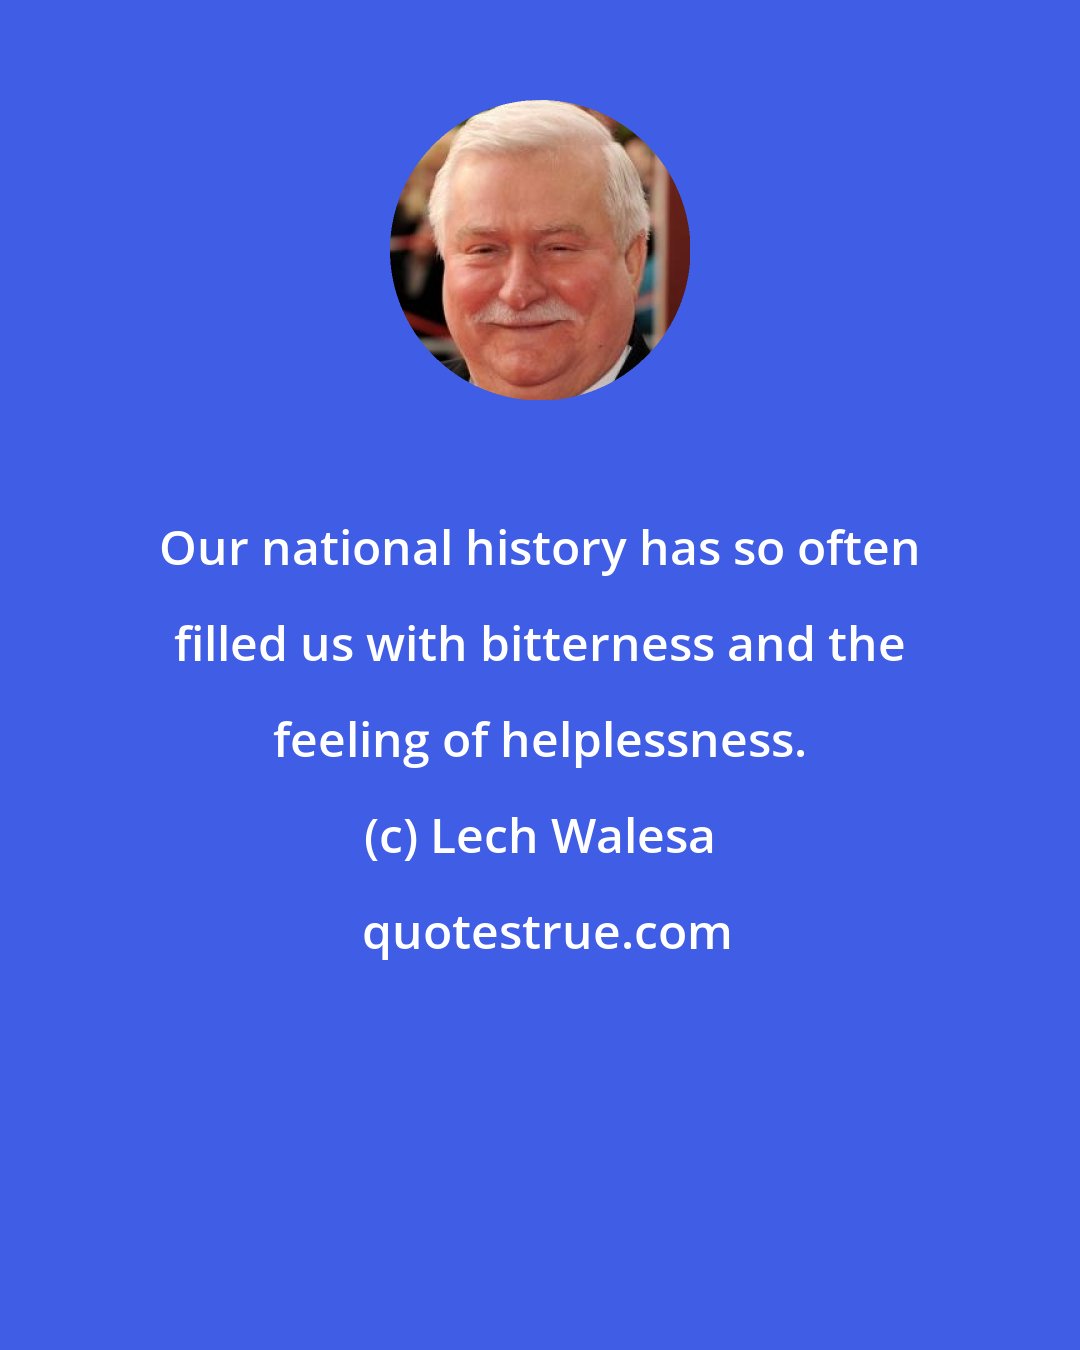 Lech Walesa: Our national history has so often filled us with bitterness and the feeling of helplessness.